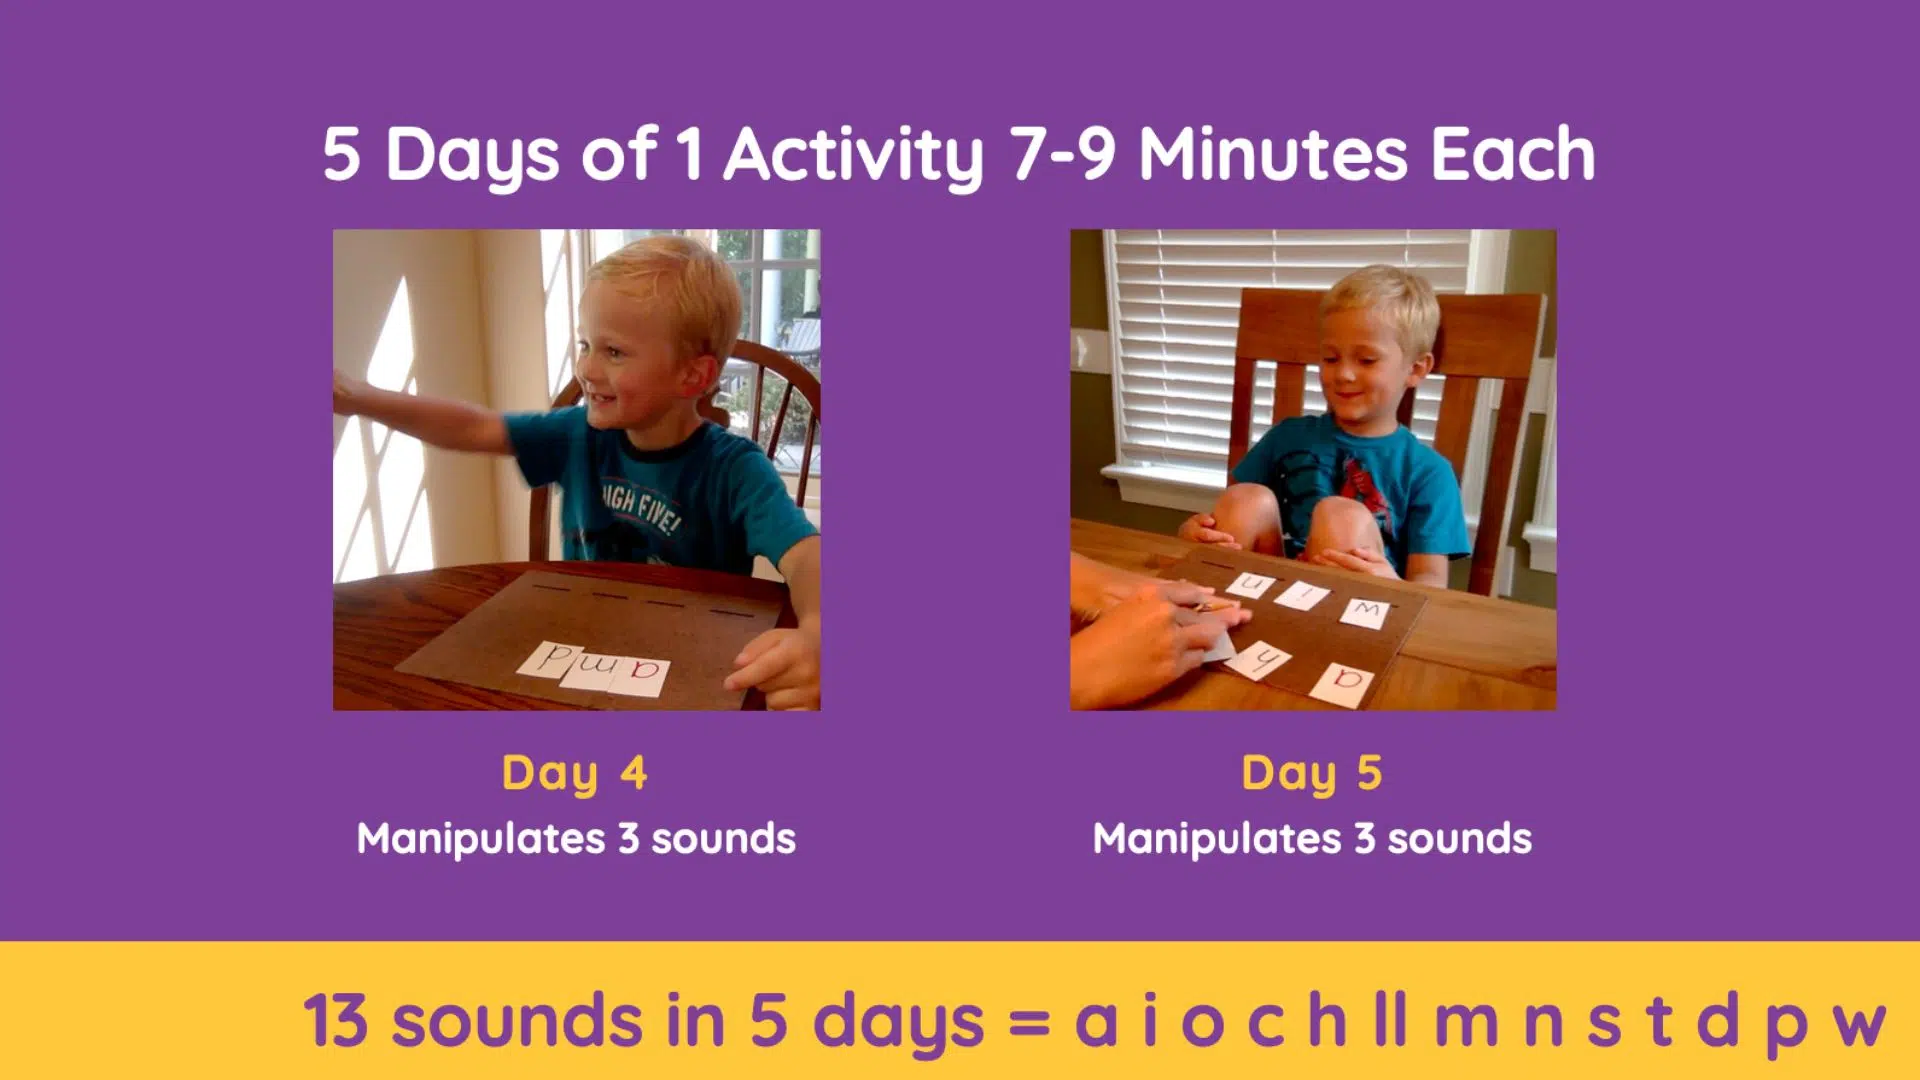 a 4 year-old learns 13 Sounds in 5 days with Build It & Switch It